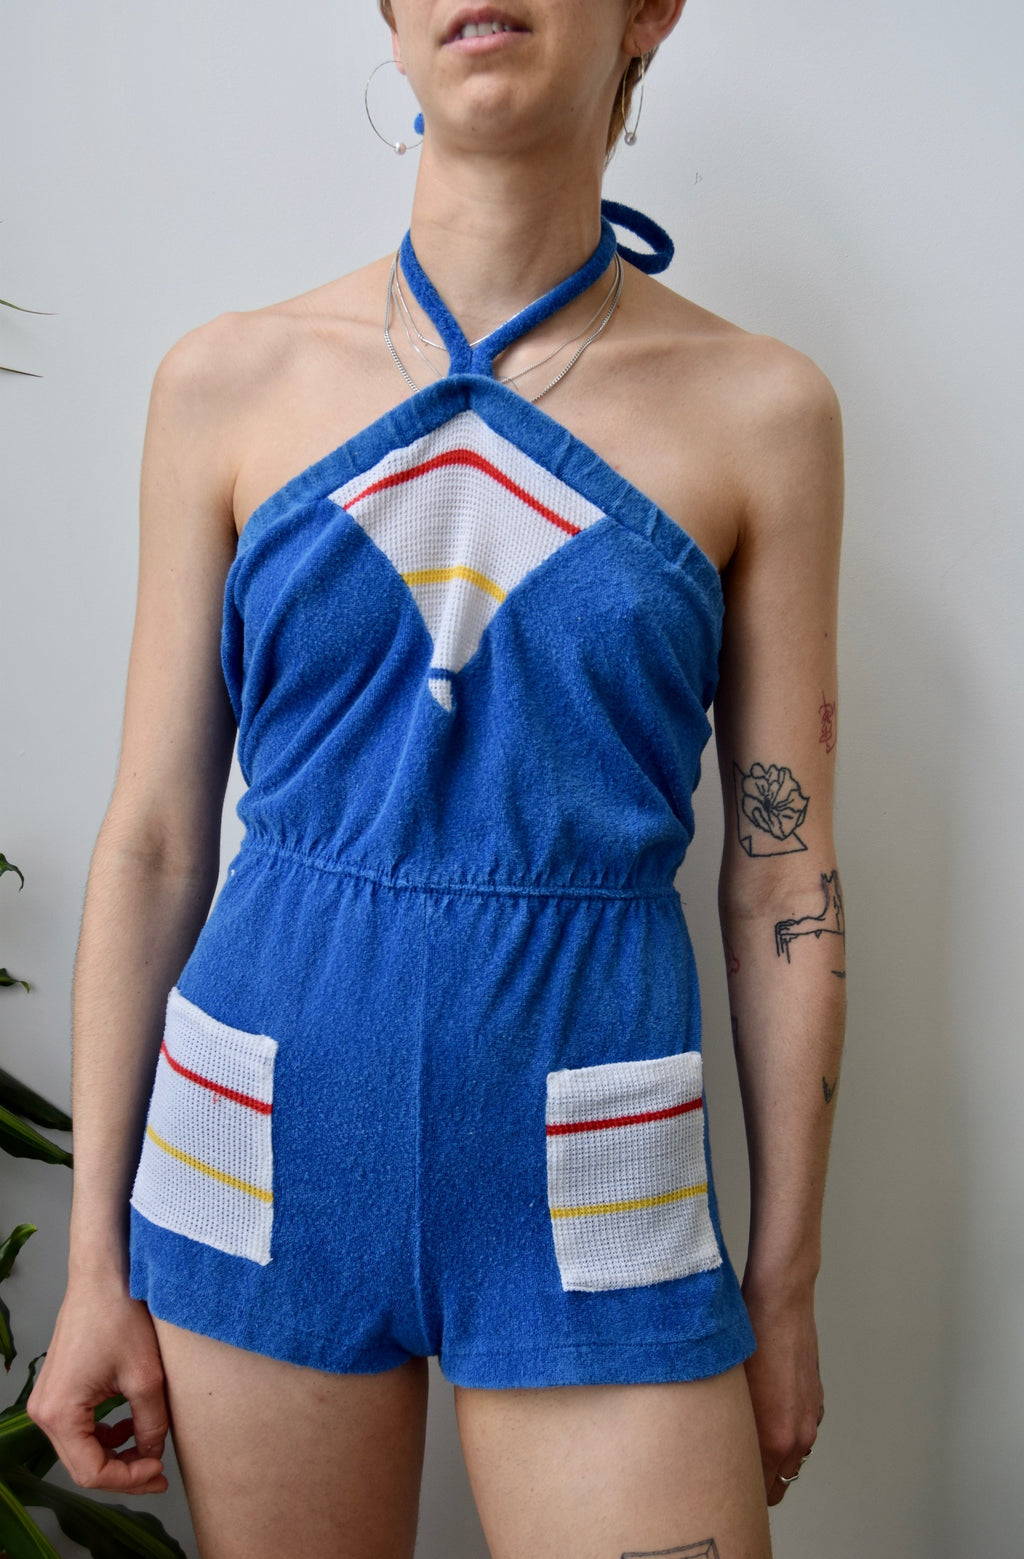 Terry Cloth Play Suit